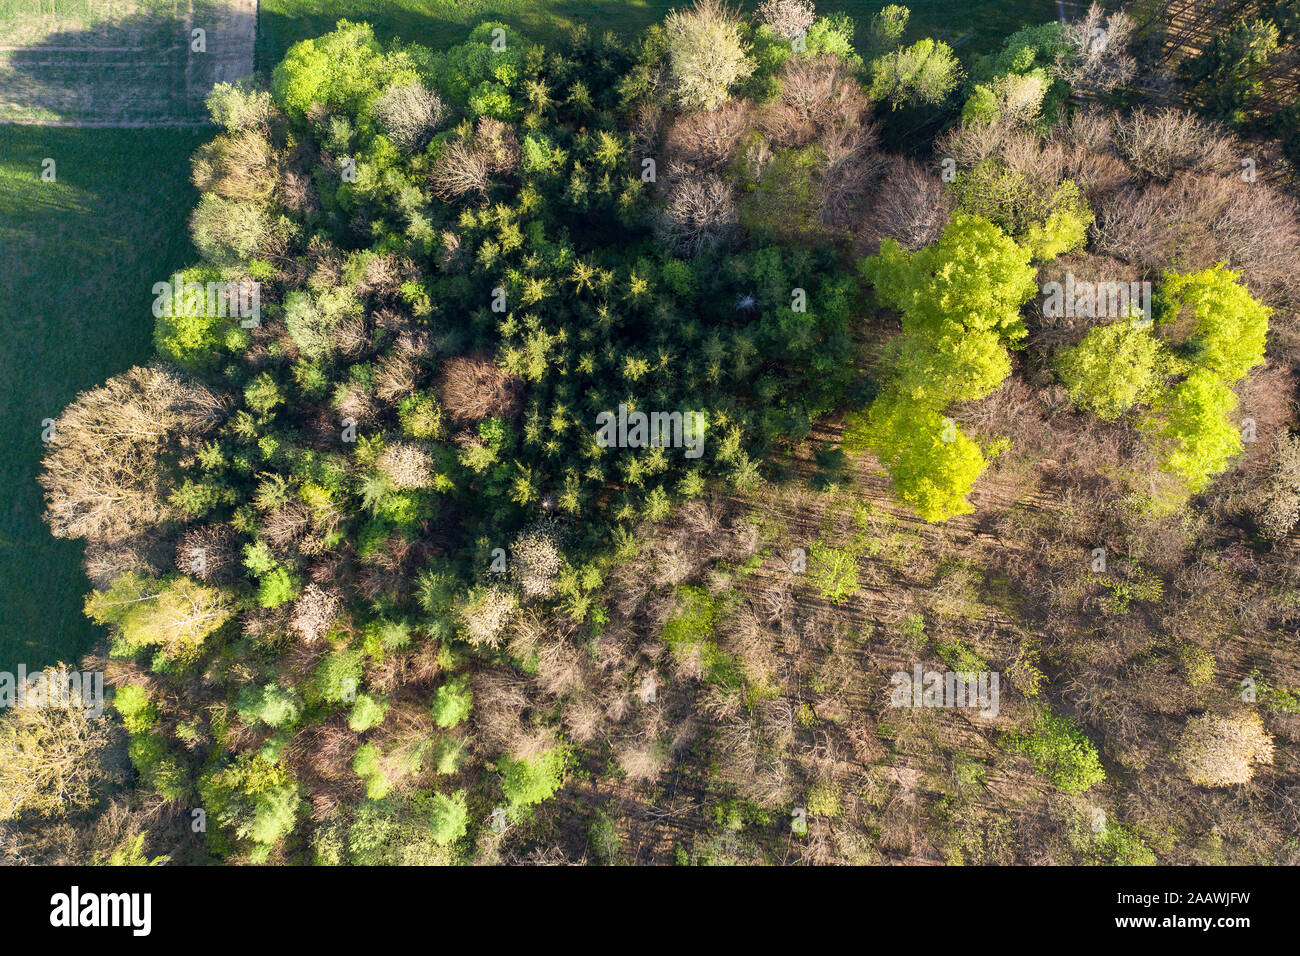 Aerial view of trees growing in forest, Dietramszell, Germany Stock Photo